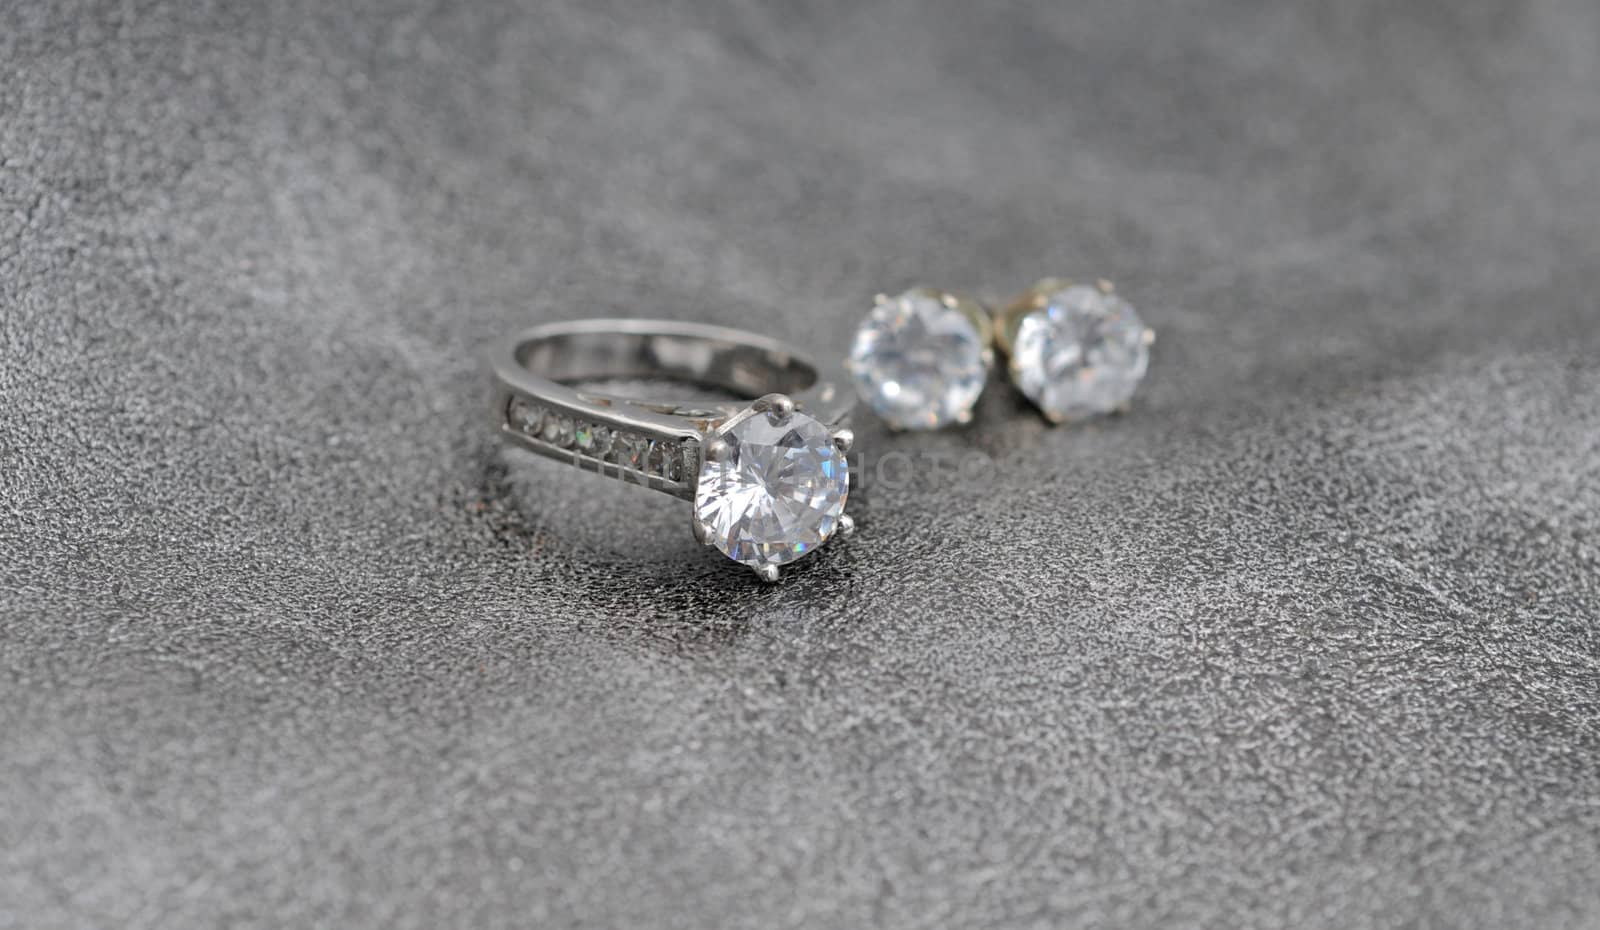 diamind jewelry consisting of engagement ring and earrings